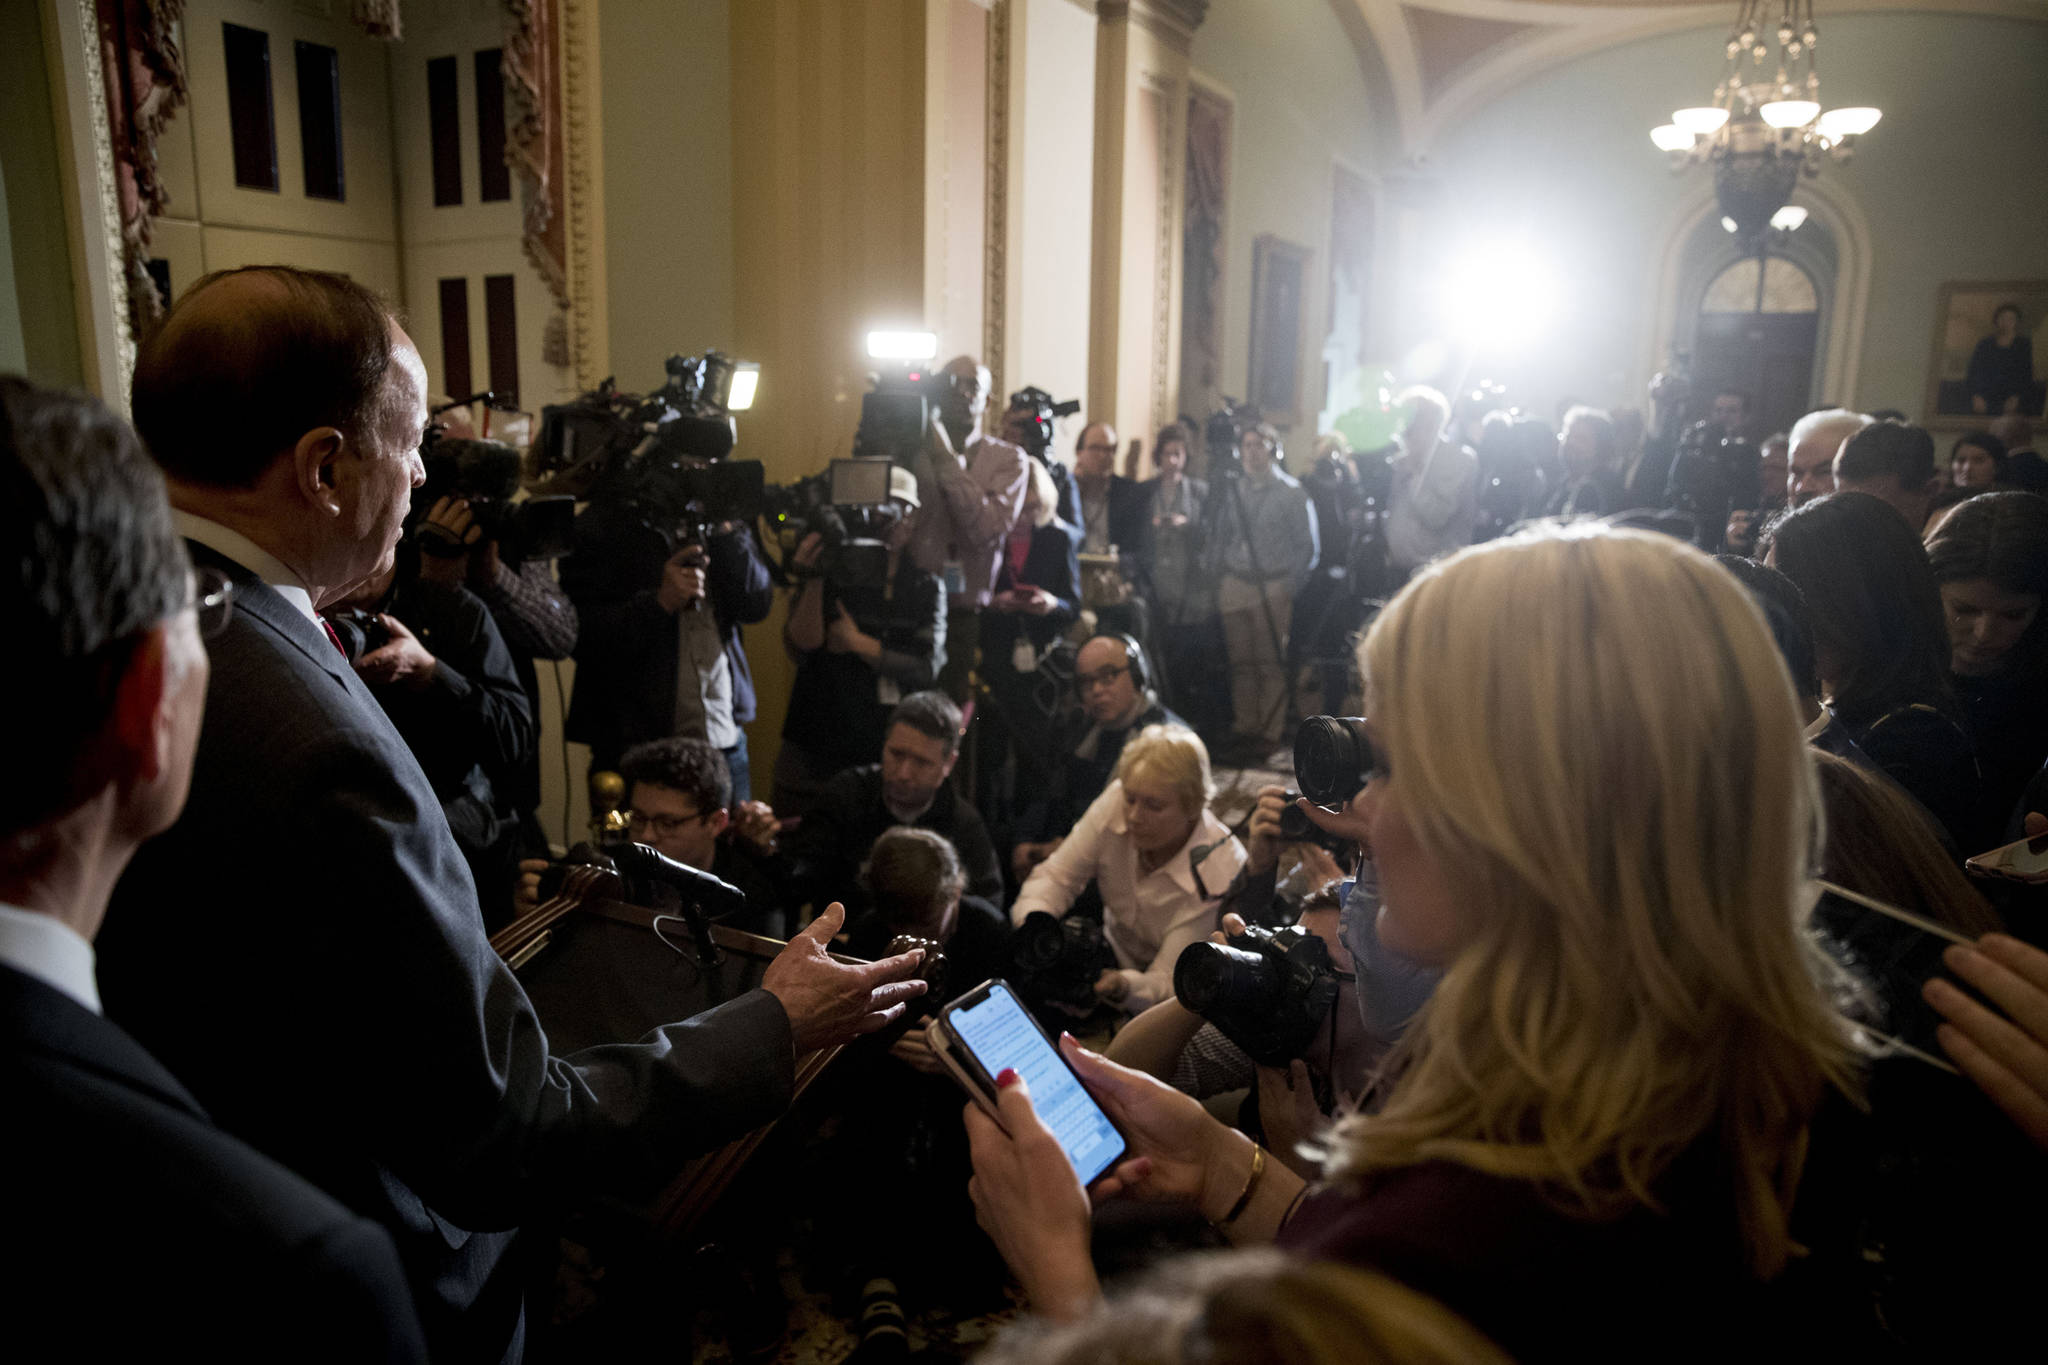 Sen. Richard Shelby, R-Alabama, speaks to reporters following a Senate policy luncheon after House and Senate negotiators worked out a border security compromise hoping to avoid another government shutdown on Capitol Hill on Tuesday, Feb. 12, 2019 in Washington, D.C. (Andrew Harnik | Associated Press)